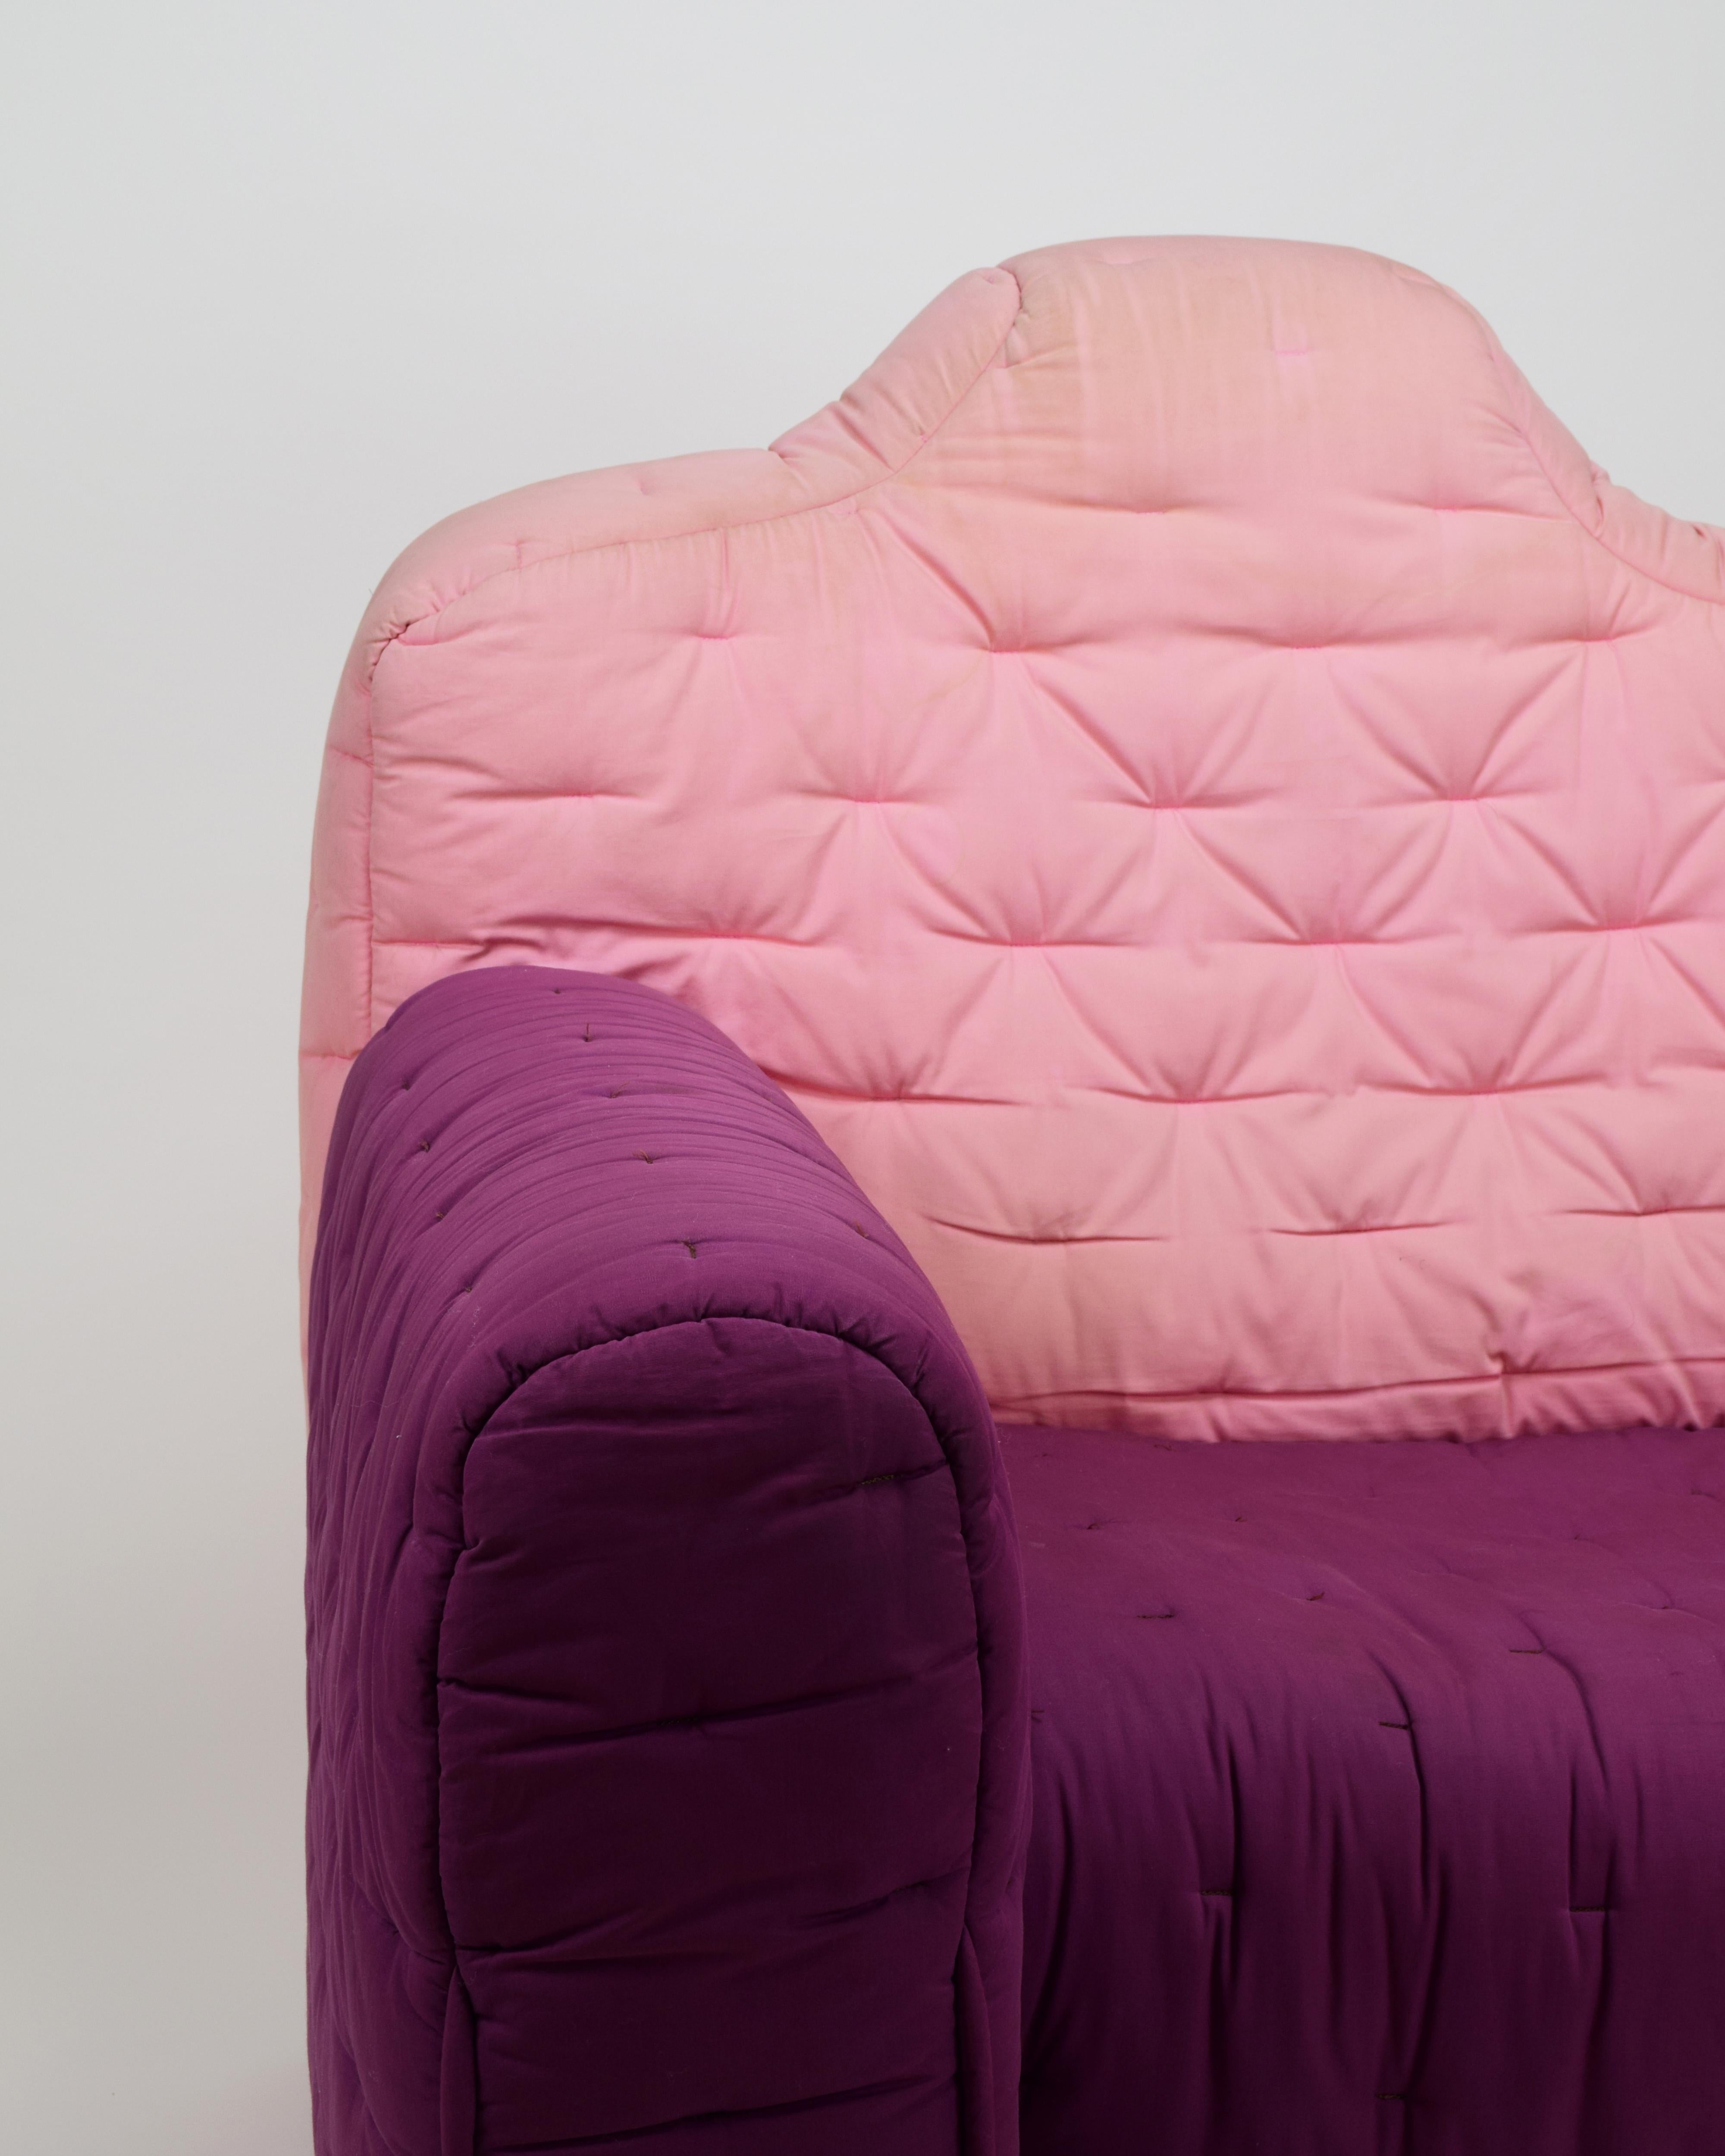 Gaetano Pesce, 'Cannaregio' Armchair, Cassina Italy 1987, Large Pink and Purple For Sale 3